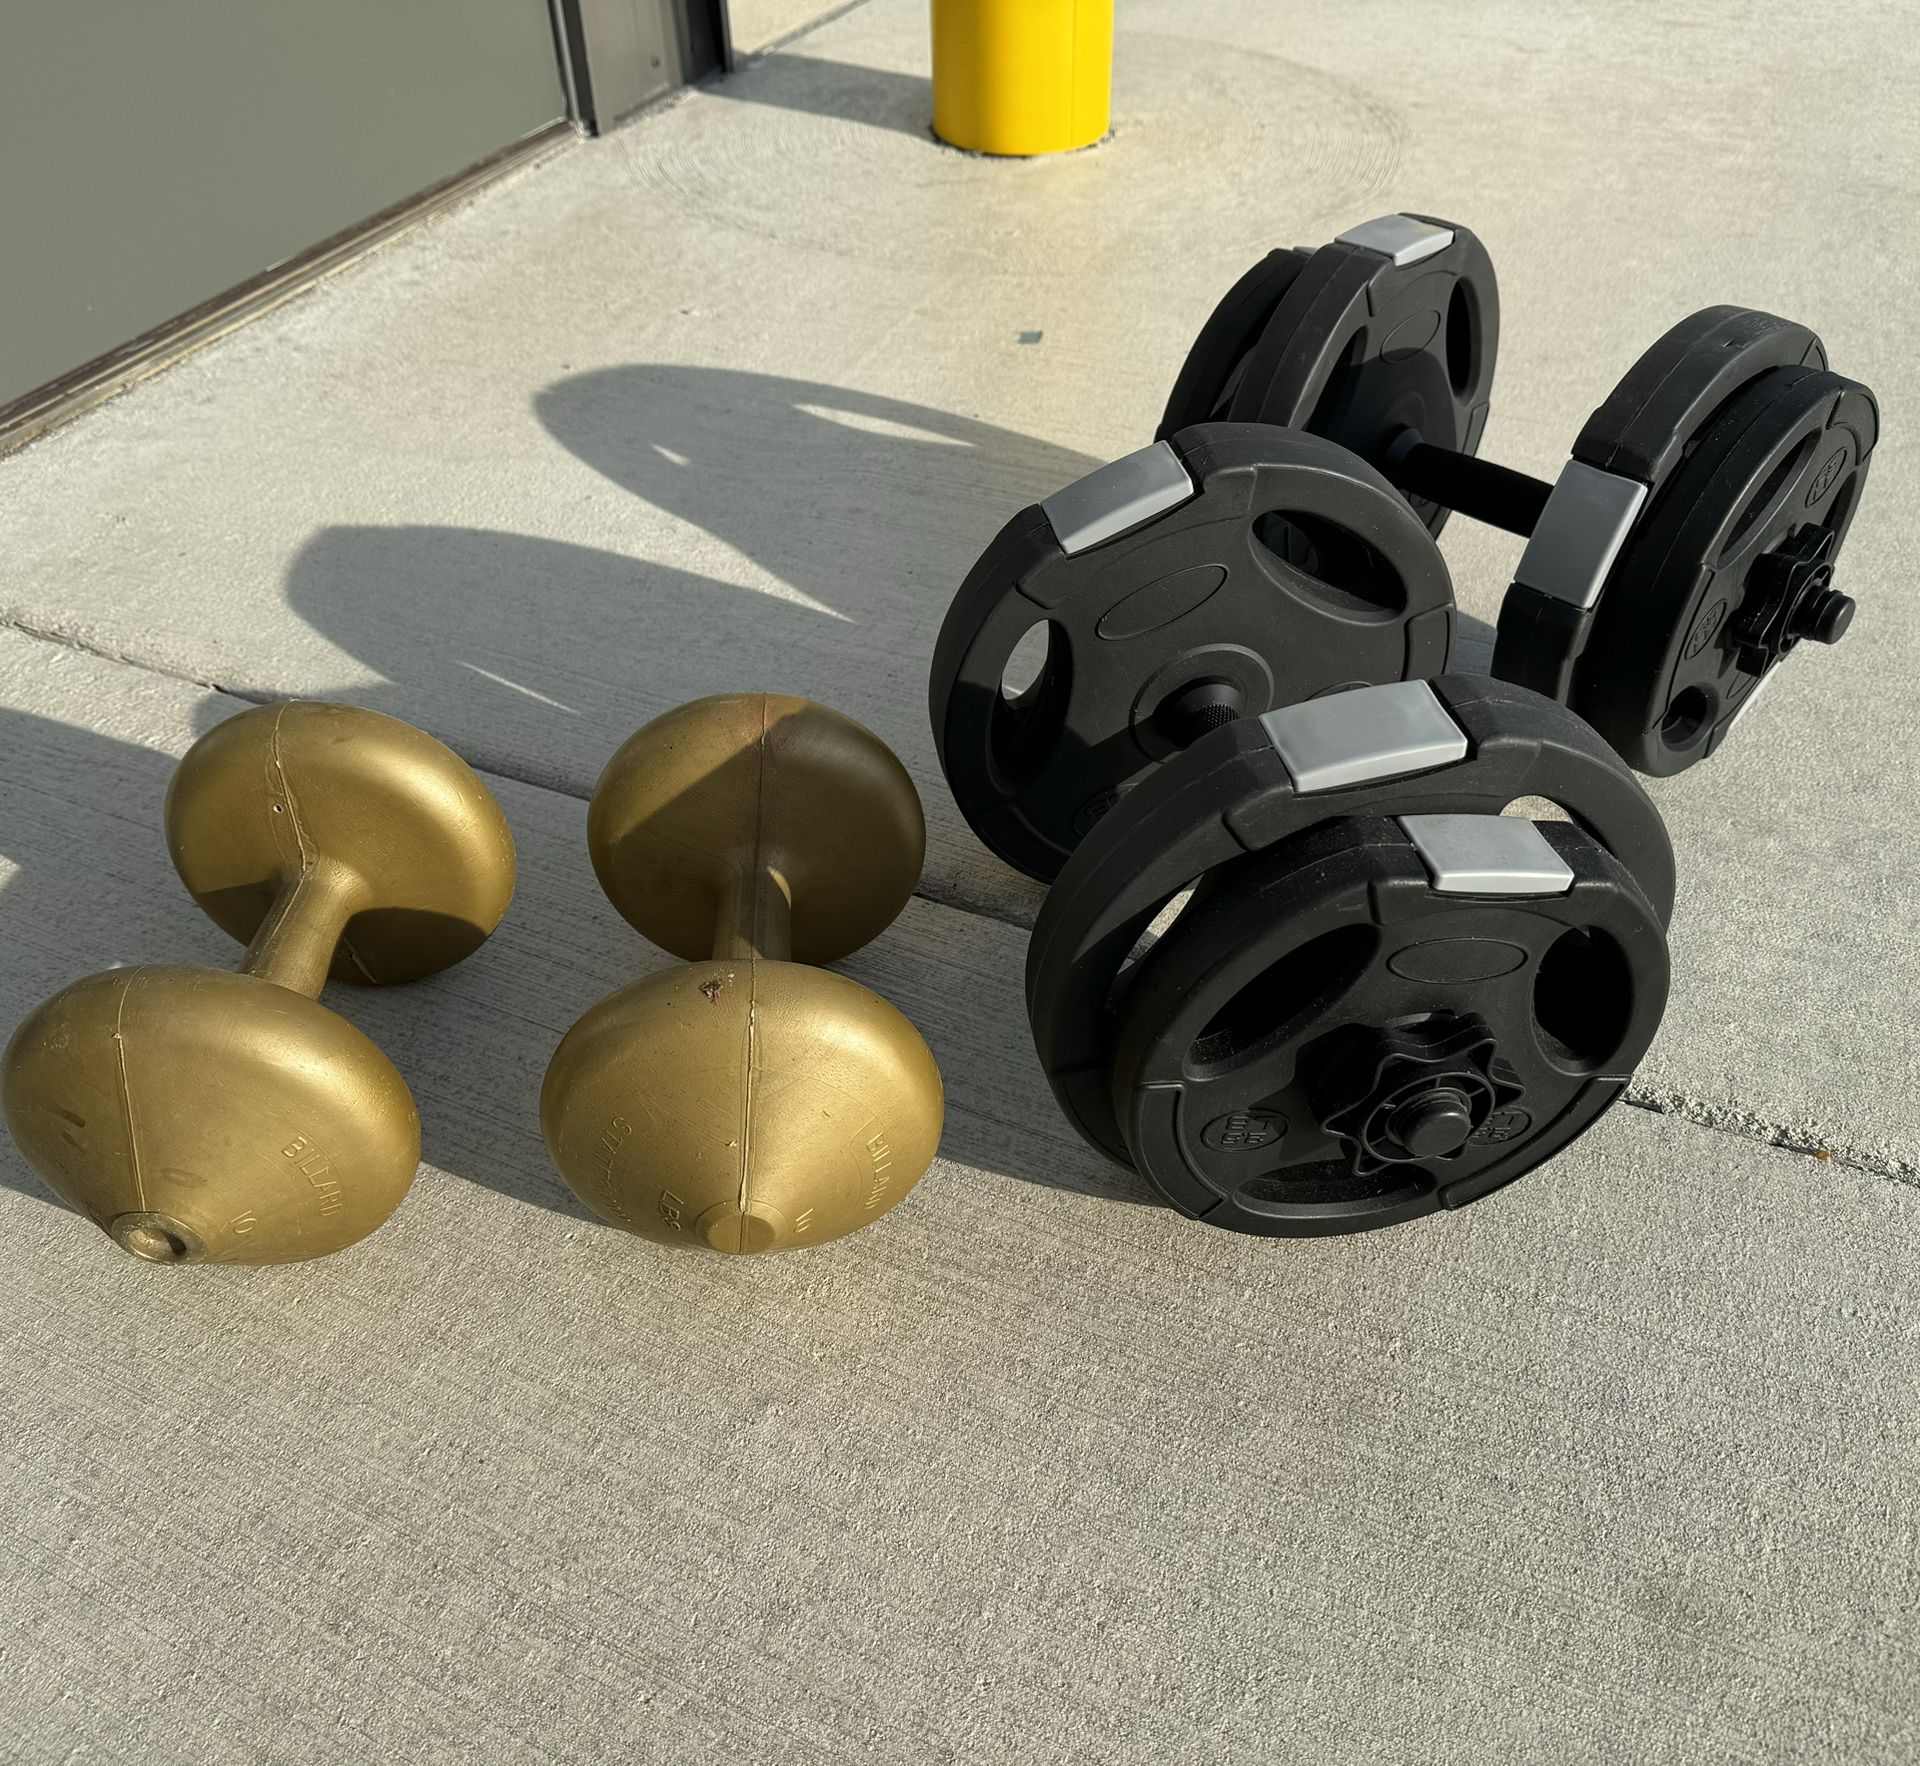 2.5lb & 5lb (black color) and 2 of 10 lb (yellow ) dumbbells - all for one money